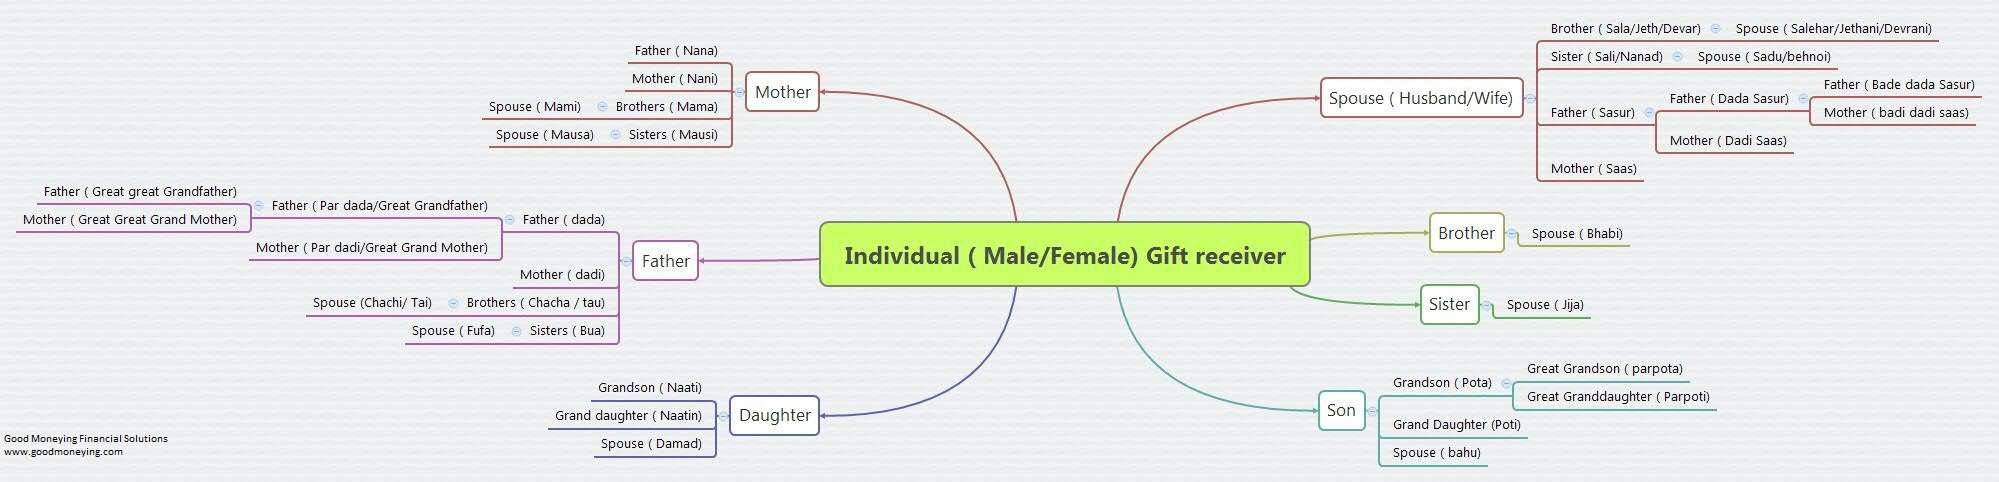 Gift Chart As Per Income Tax